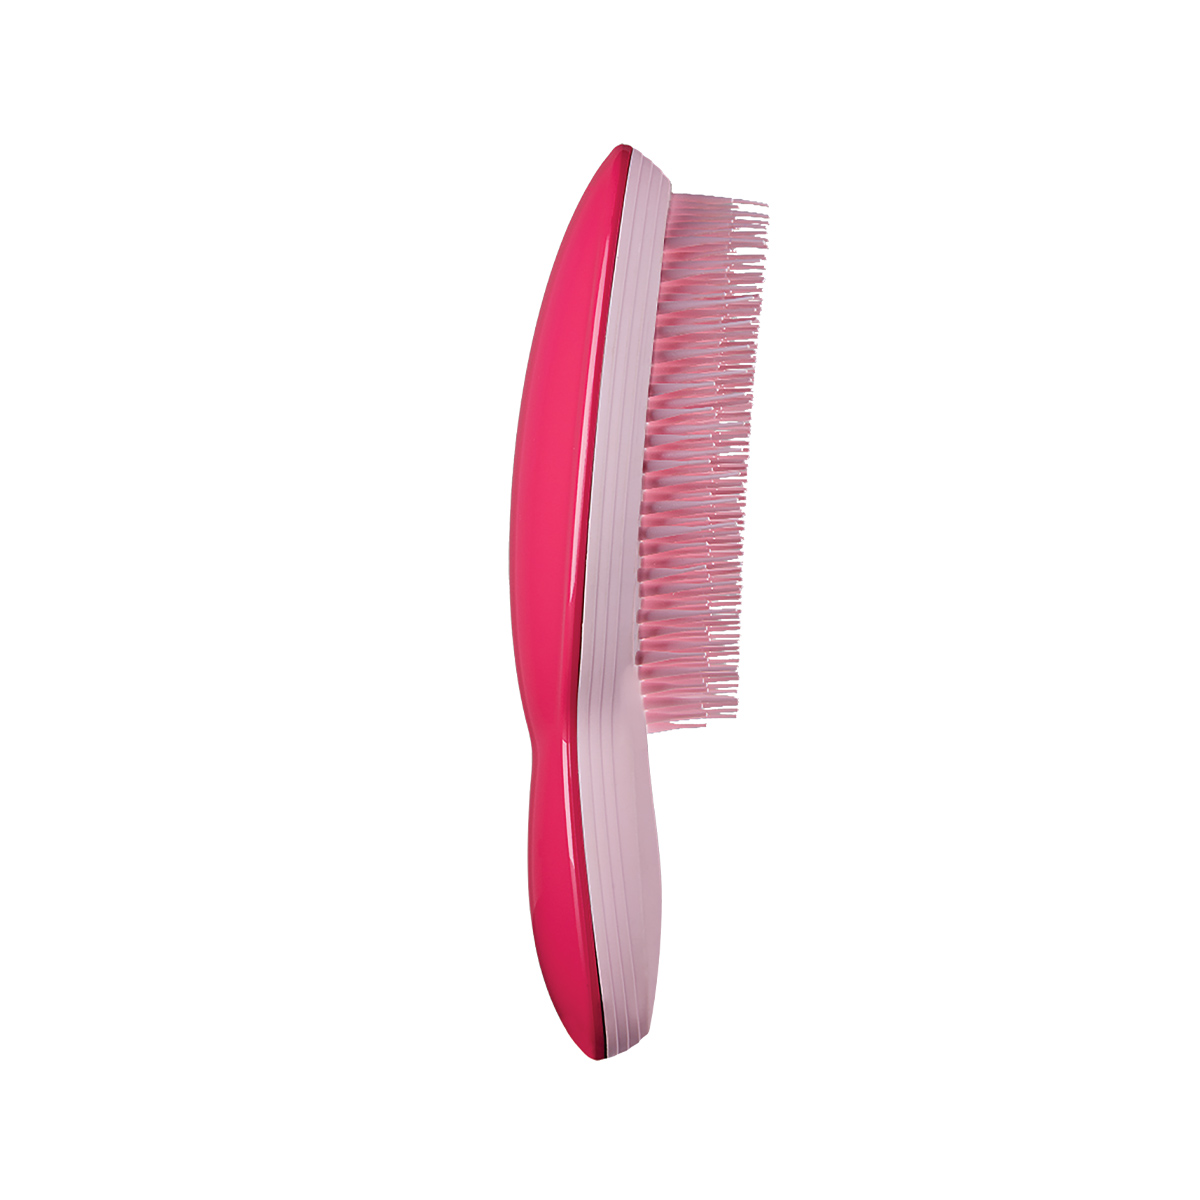 Расческа Tangle Teezer The Ultimate Finisher Pink расческа tangle teezer the ultimate styler millennial pink